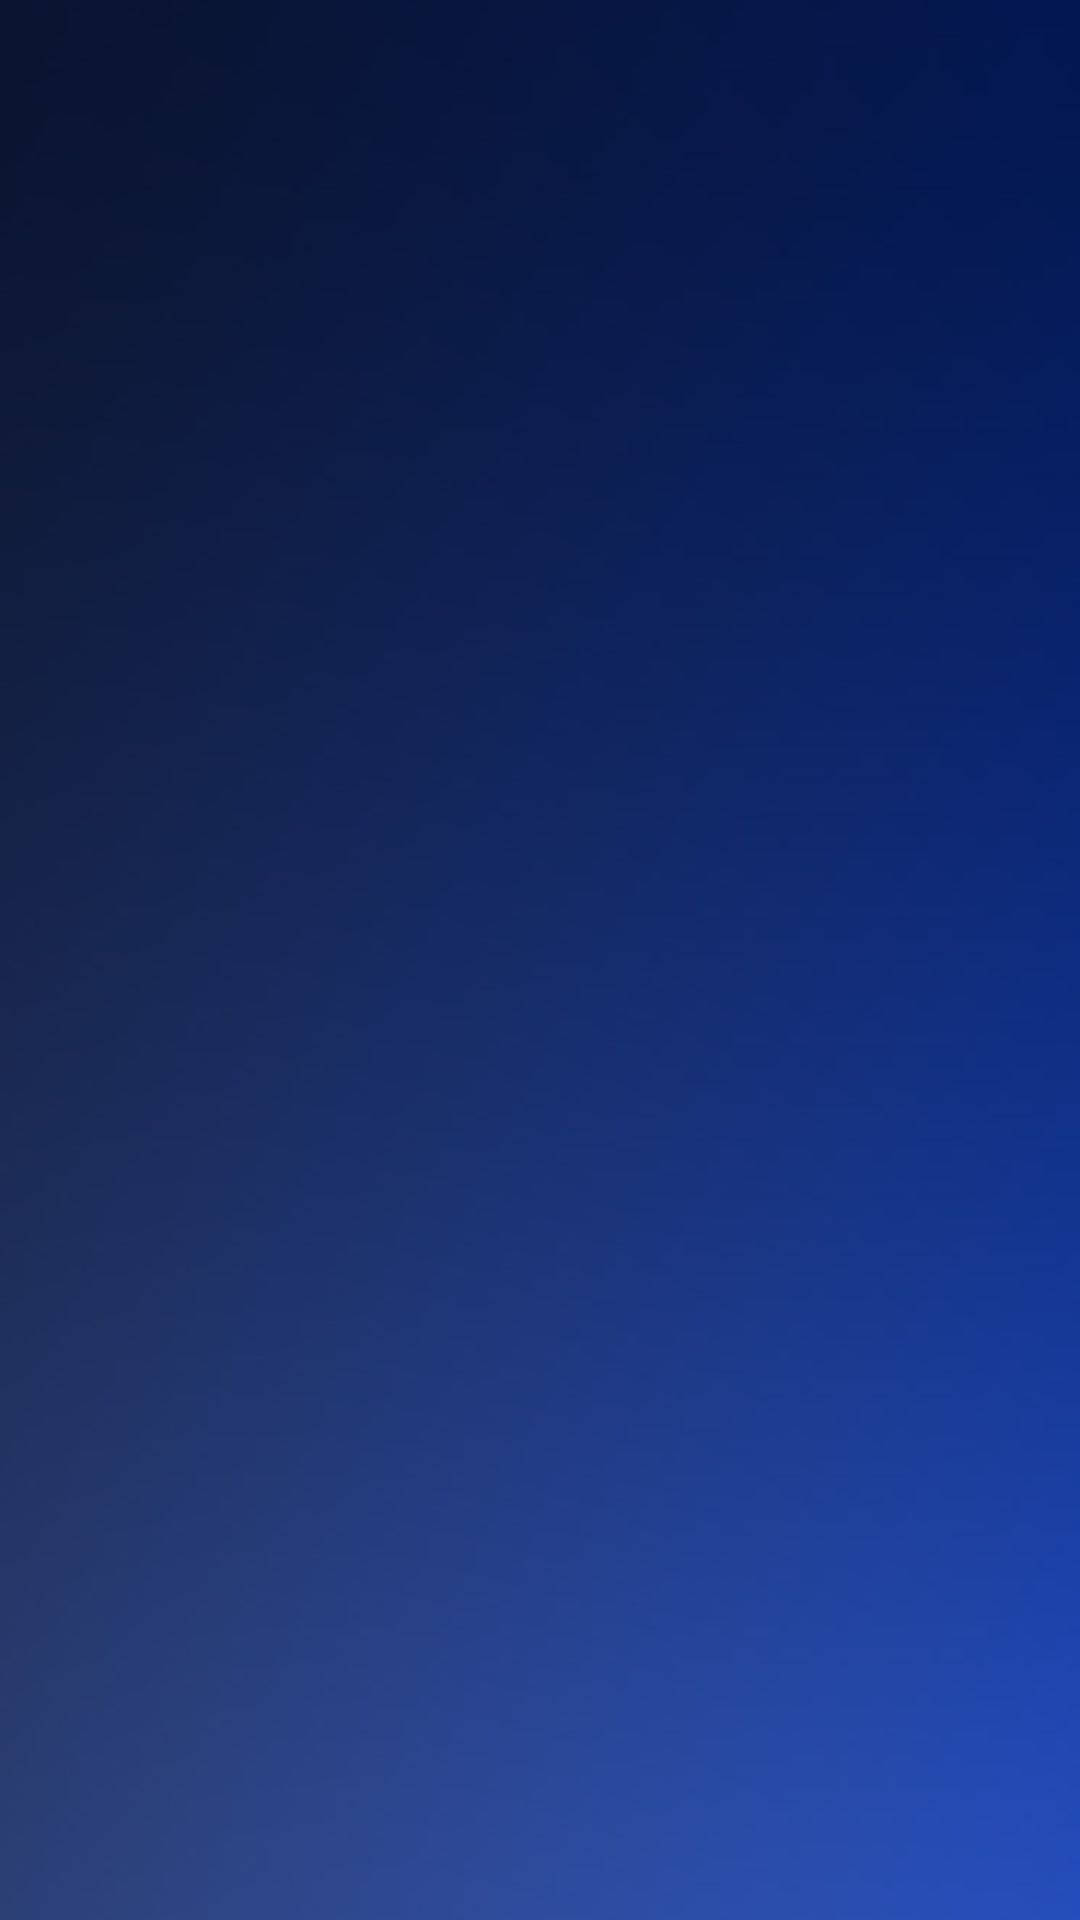 Dark Blue 1080X1920 Wallpaper and Background Image